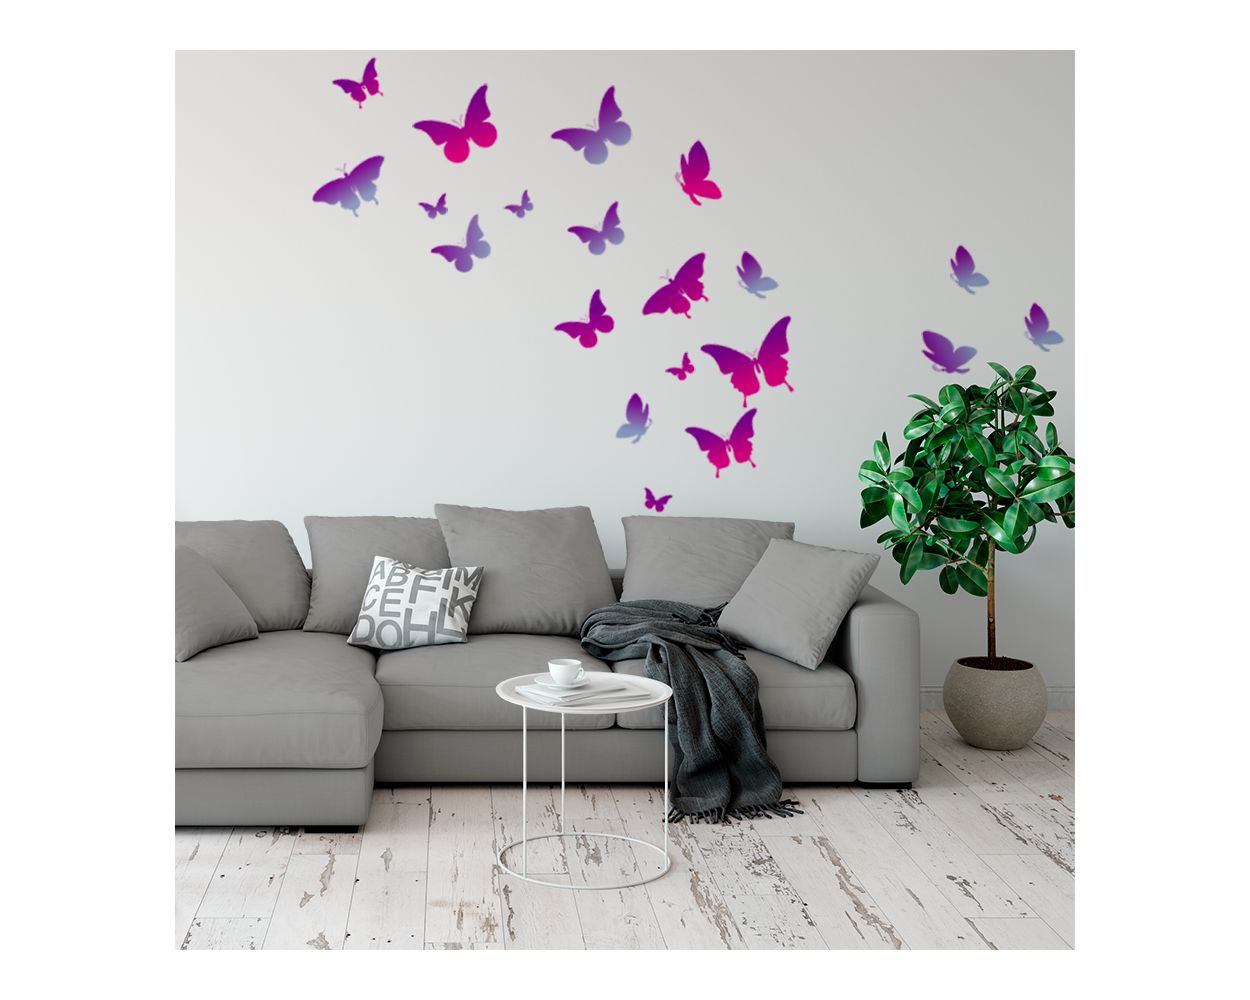 & of 20 Butterfly for Wall Set stickers kids Pink Purple wall room Pattern Stickers